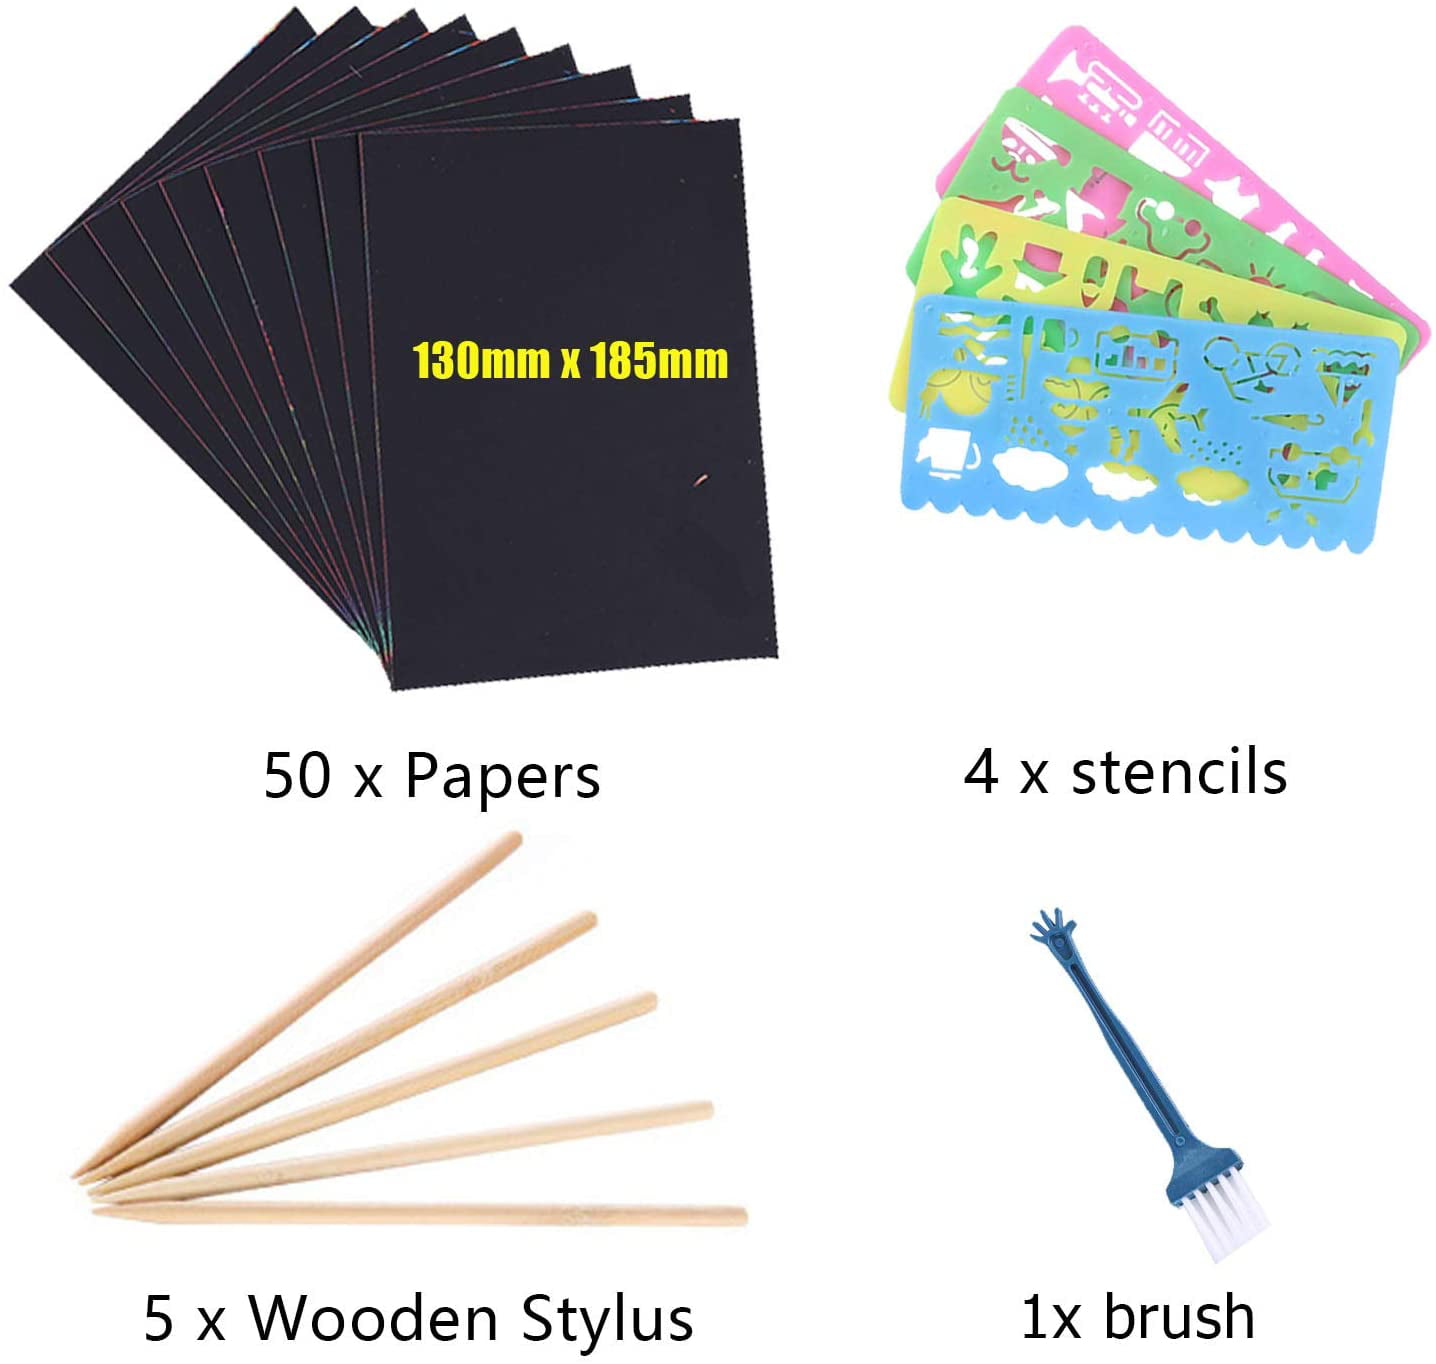 NEW 50 Sheets Black Rainbow Scratch paper with 5 wooden stylus Arts and  crafts